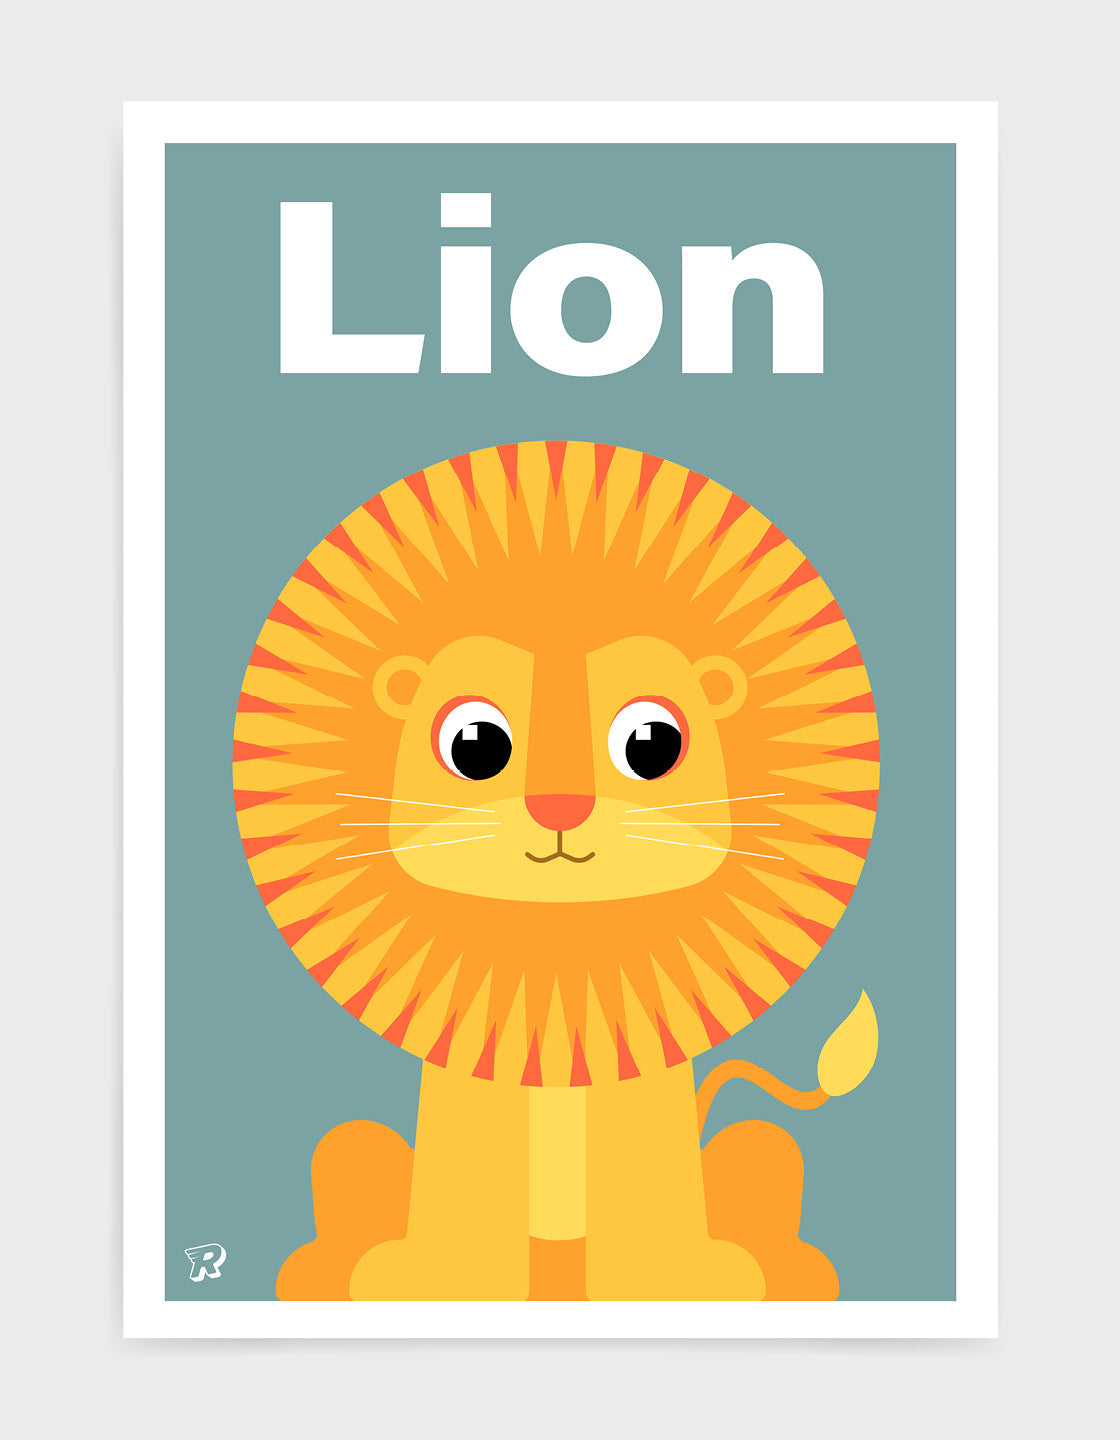 kids art print featuring a cute illustrated lion on a blue background with the word Lion in white text at the top